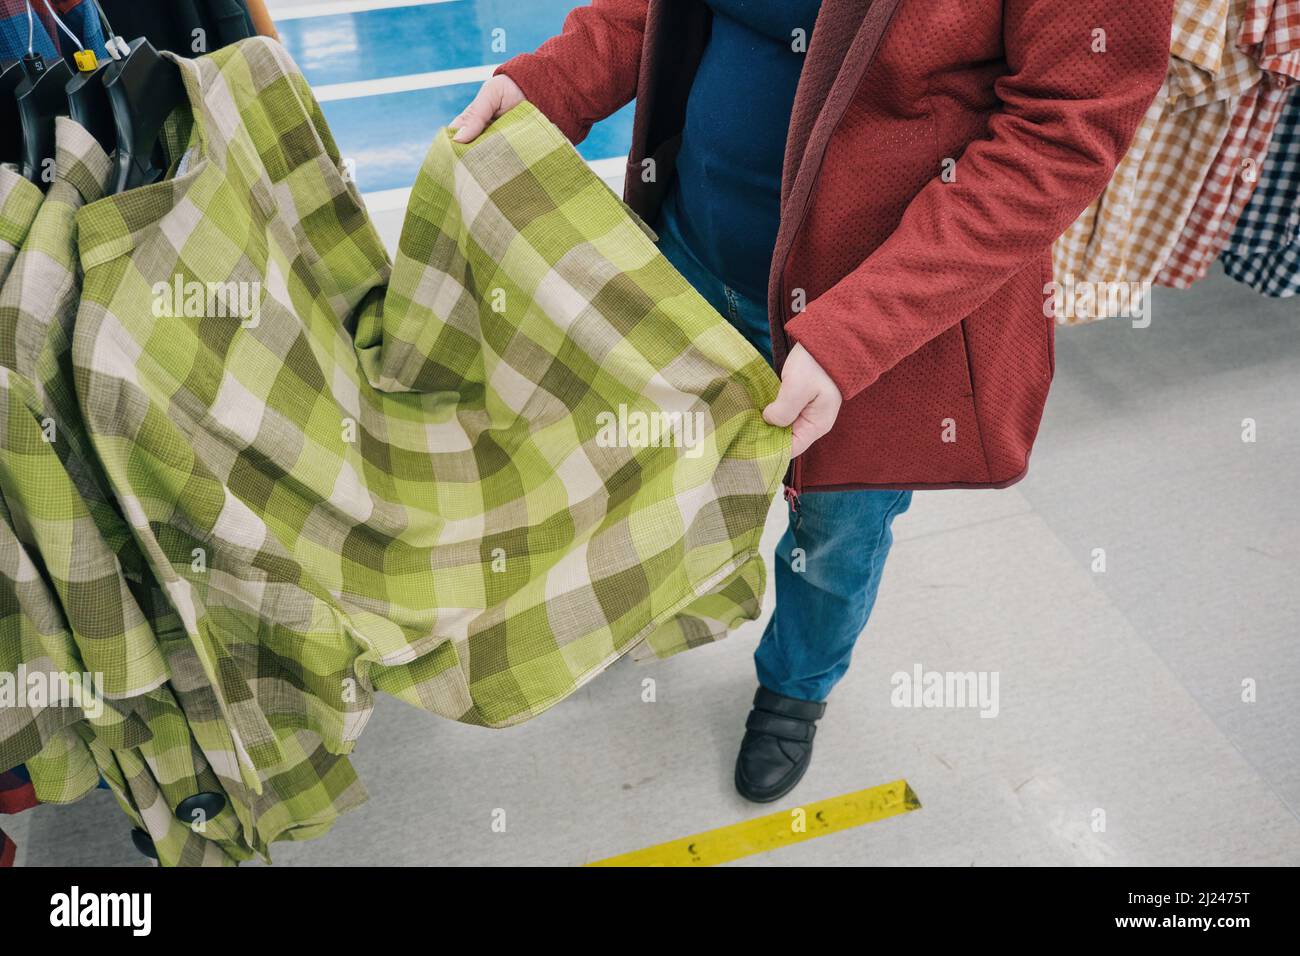 Pregnant woman chooses a roomy, green, flannelette plaid shirt in store to buy Stock Photo